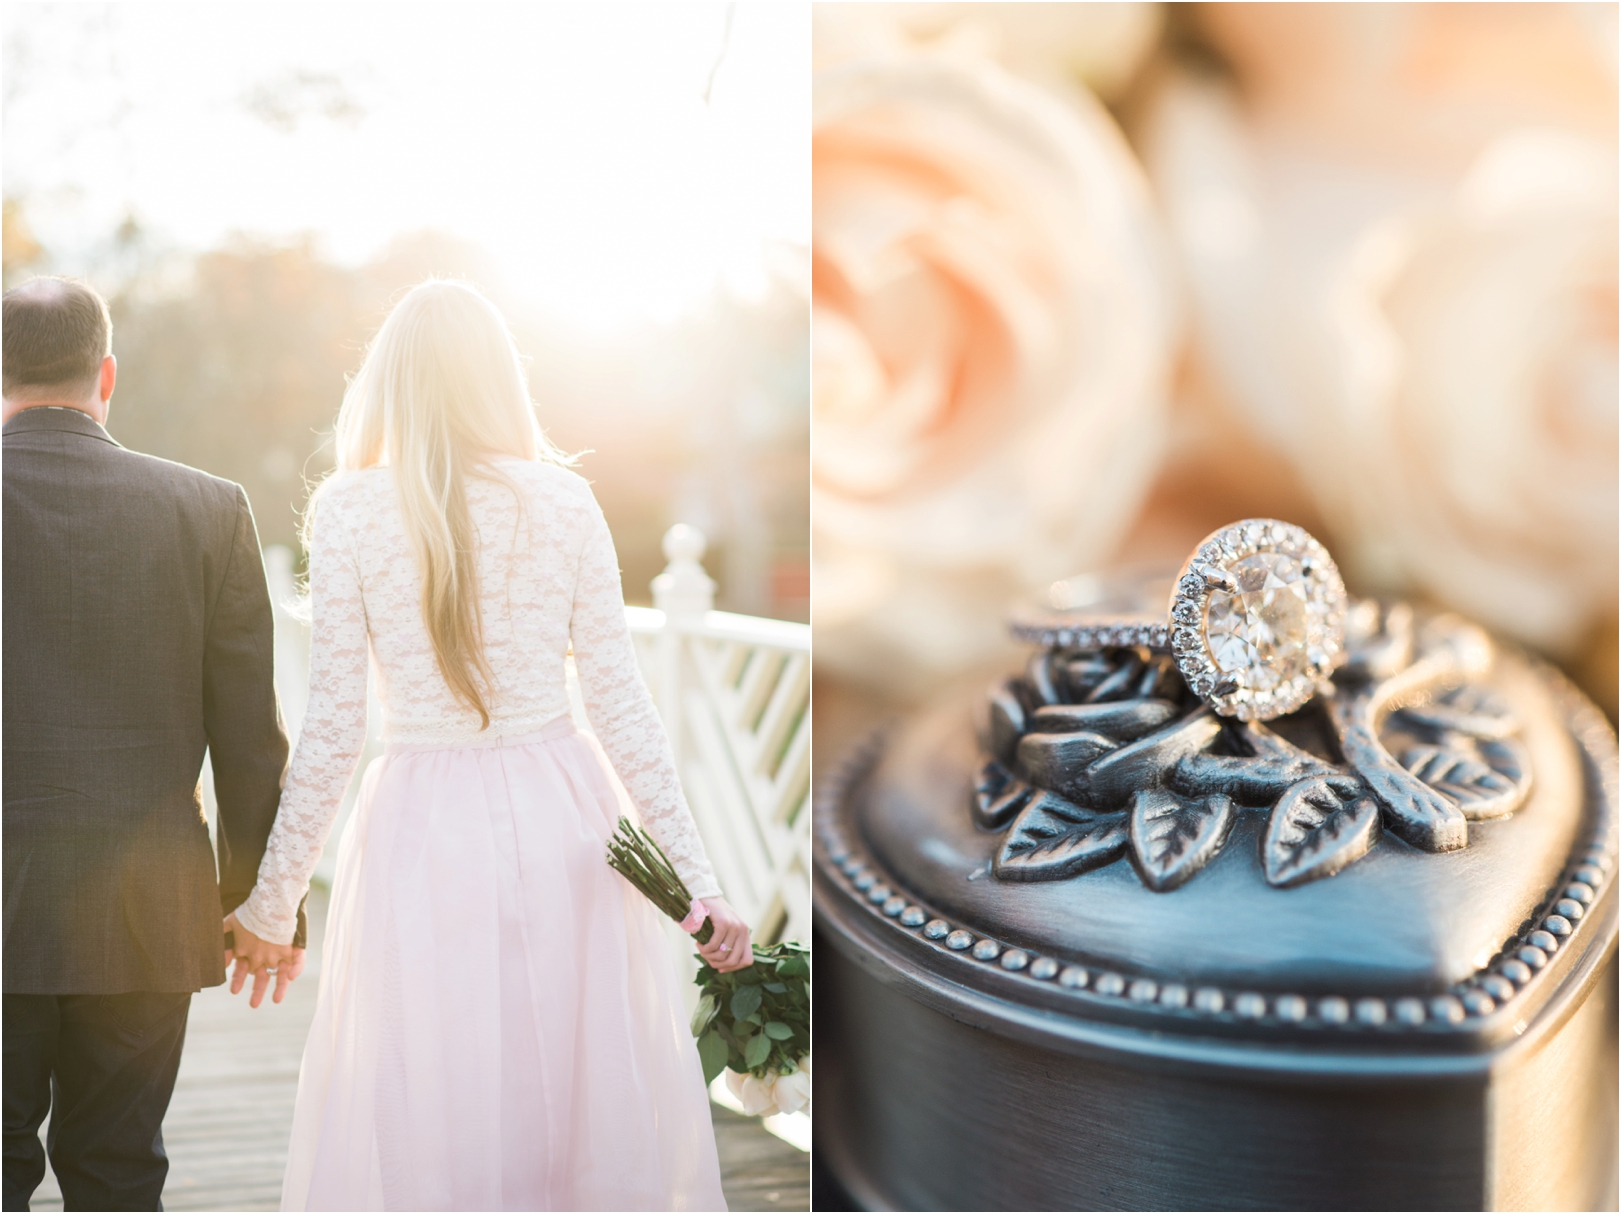 macro engagement ring photography by Joy Michelle photography 